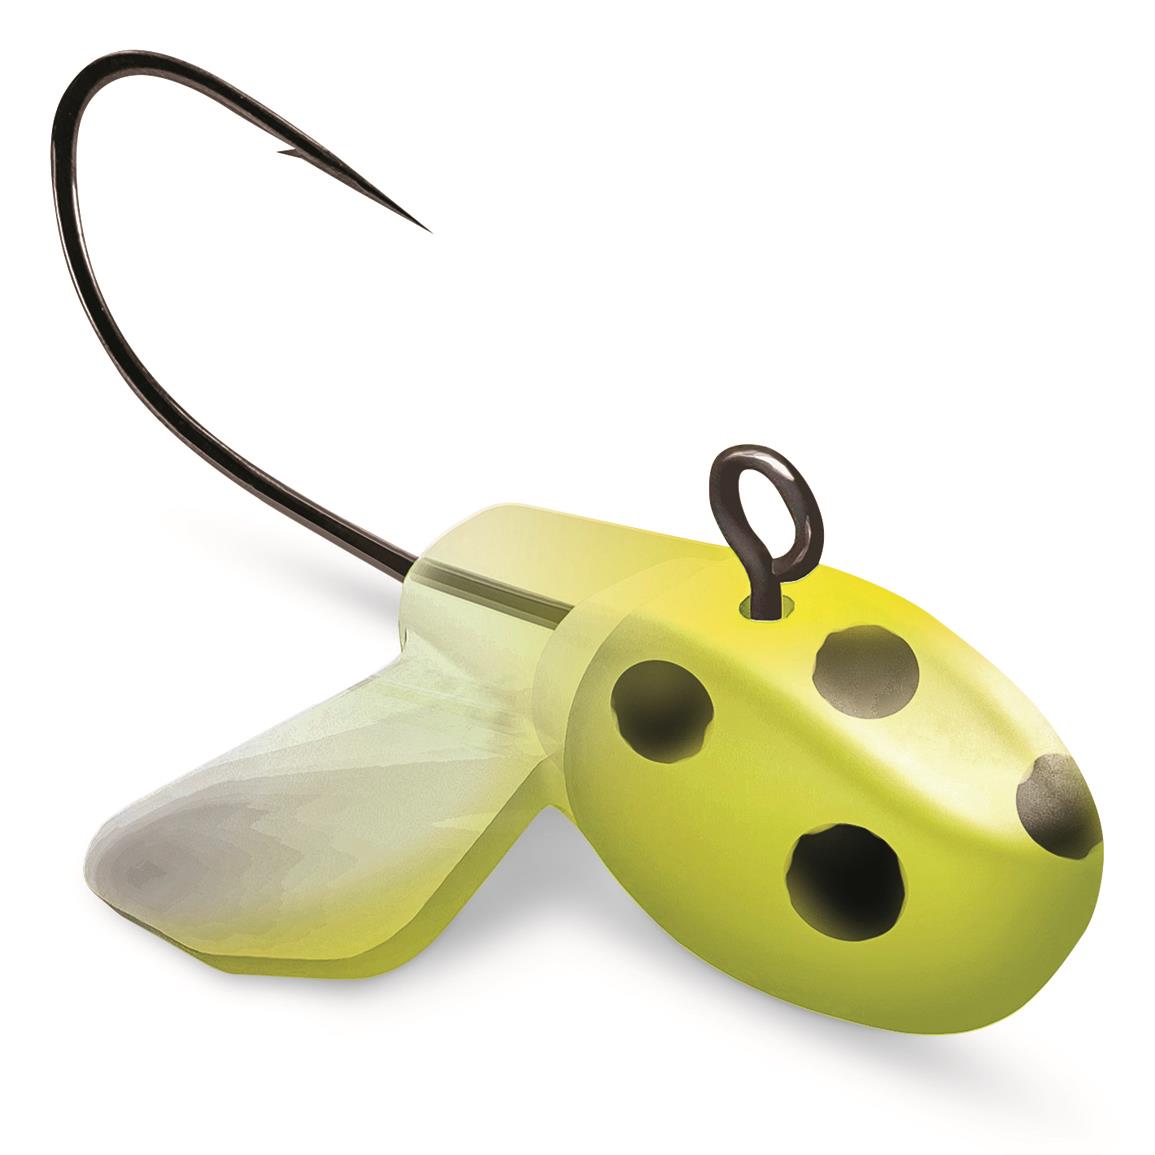 Tungsten Tubby Jig - OutfitterSSM